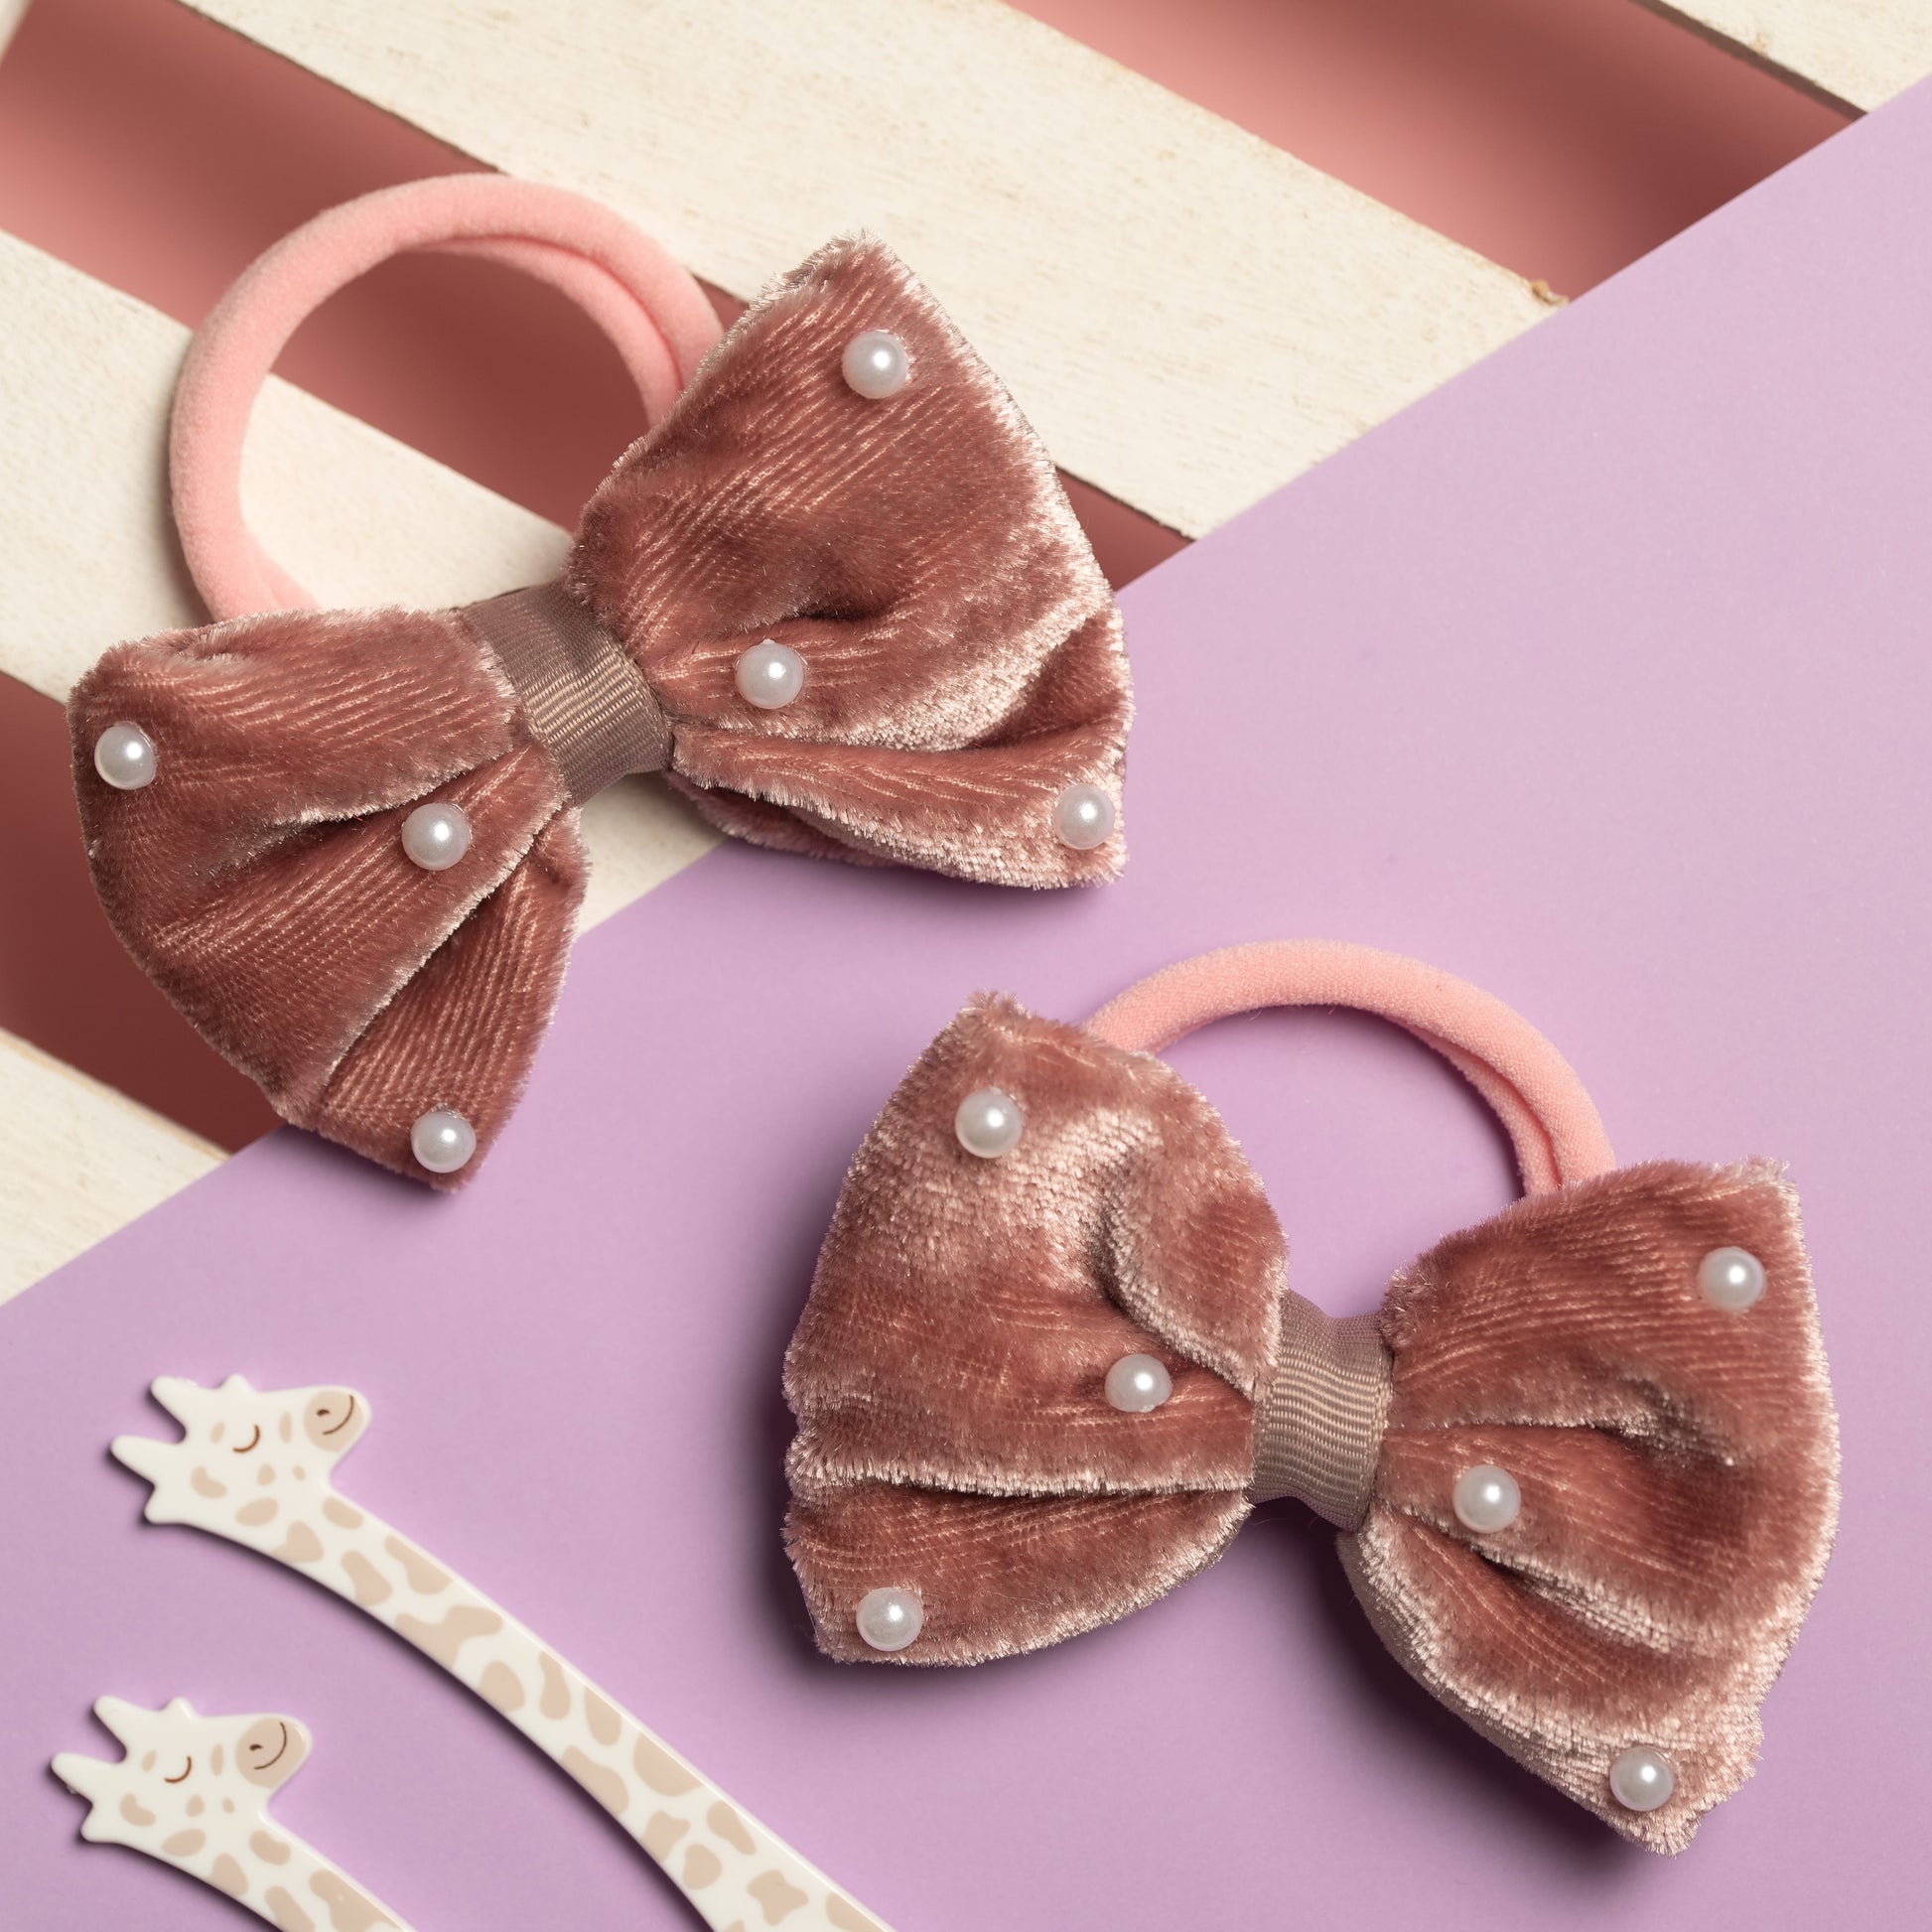 Ribbon Candy - Cute Valvet Bow With Pearl Detailing Rubber Band - Dusty Pink